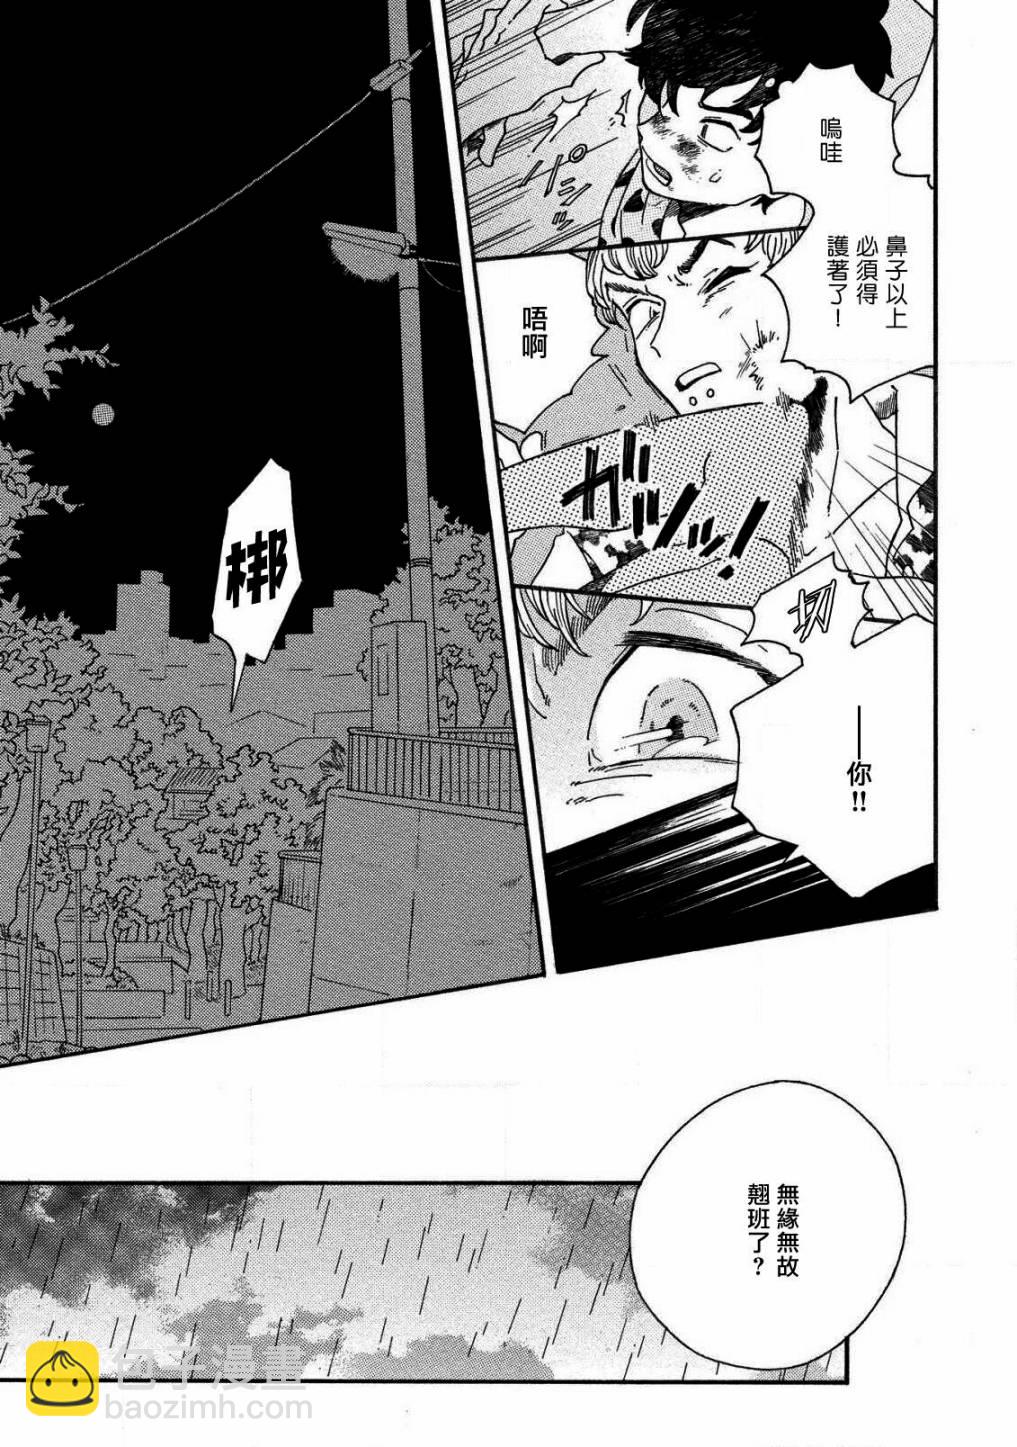 Sneaky Red - 第01話 - 5